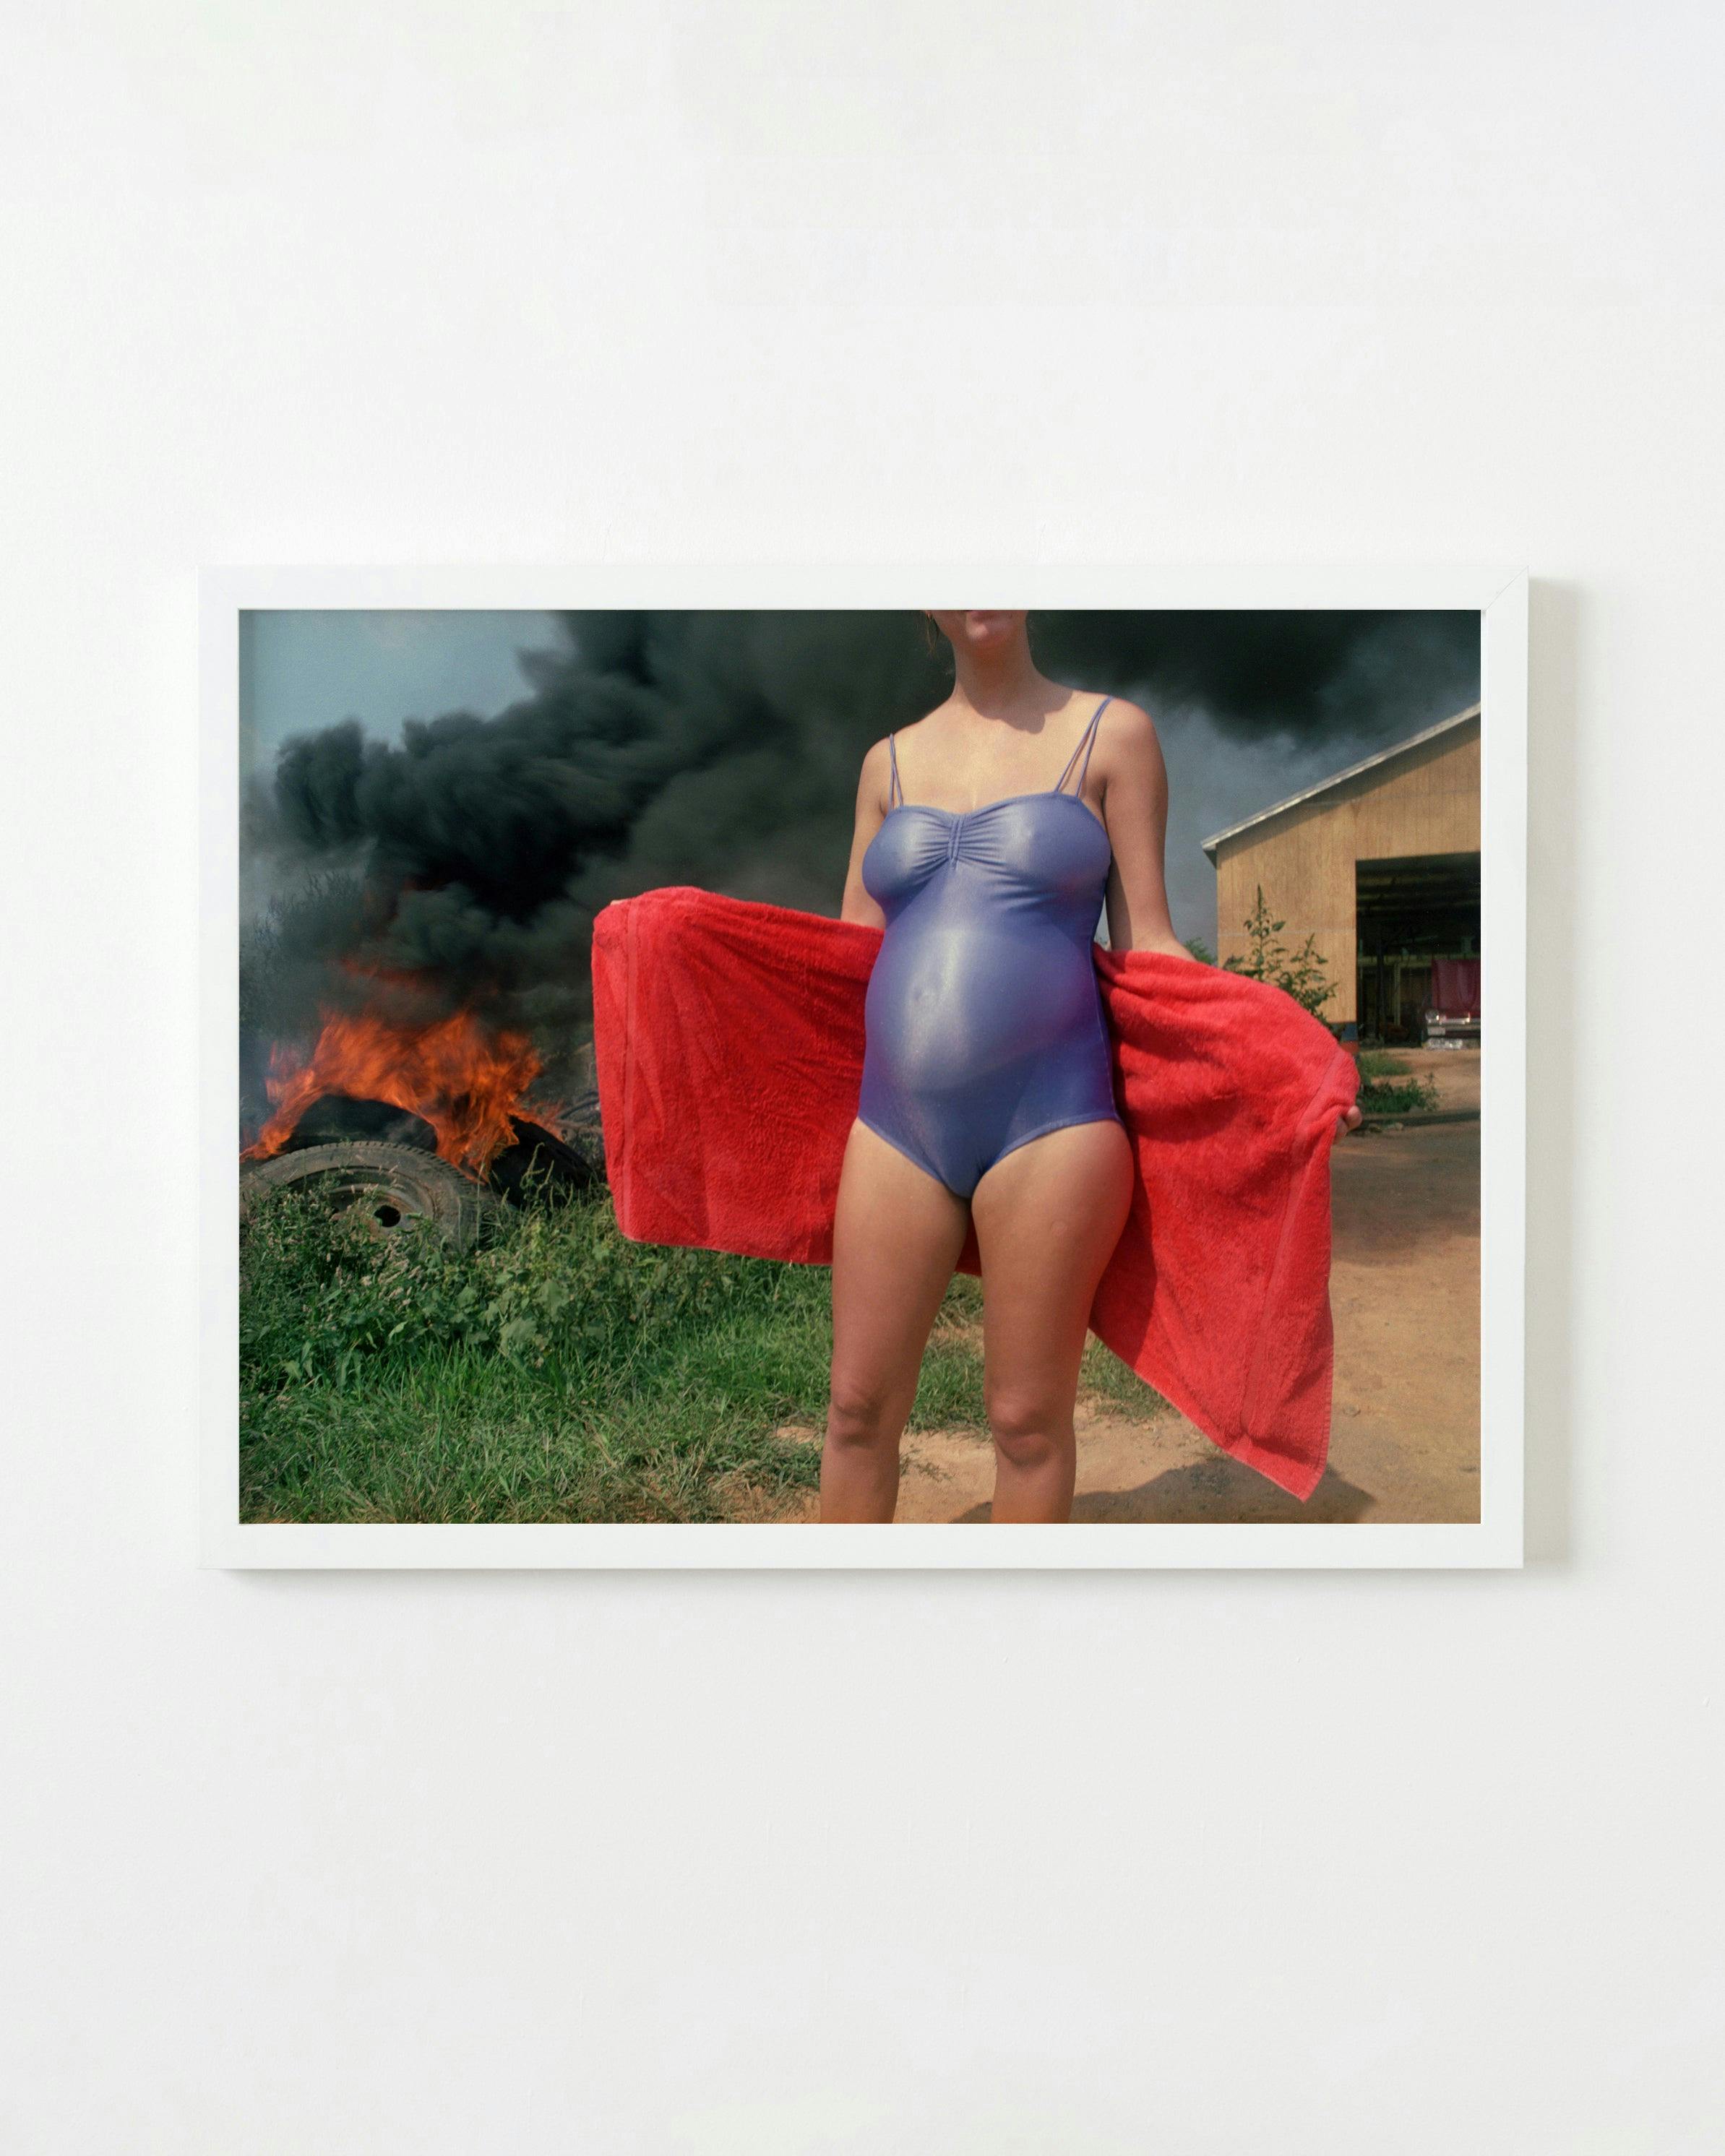 Photography by Michael Northrup titled "Tire Fire".